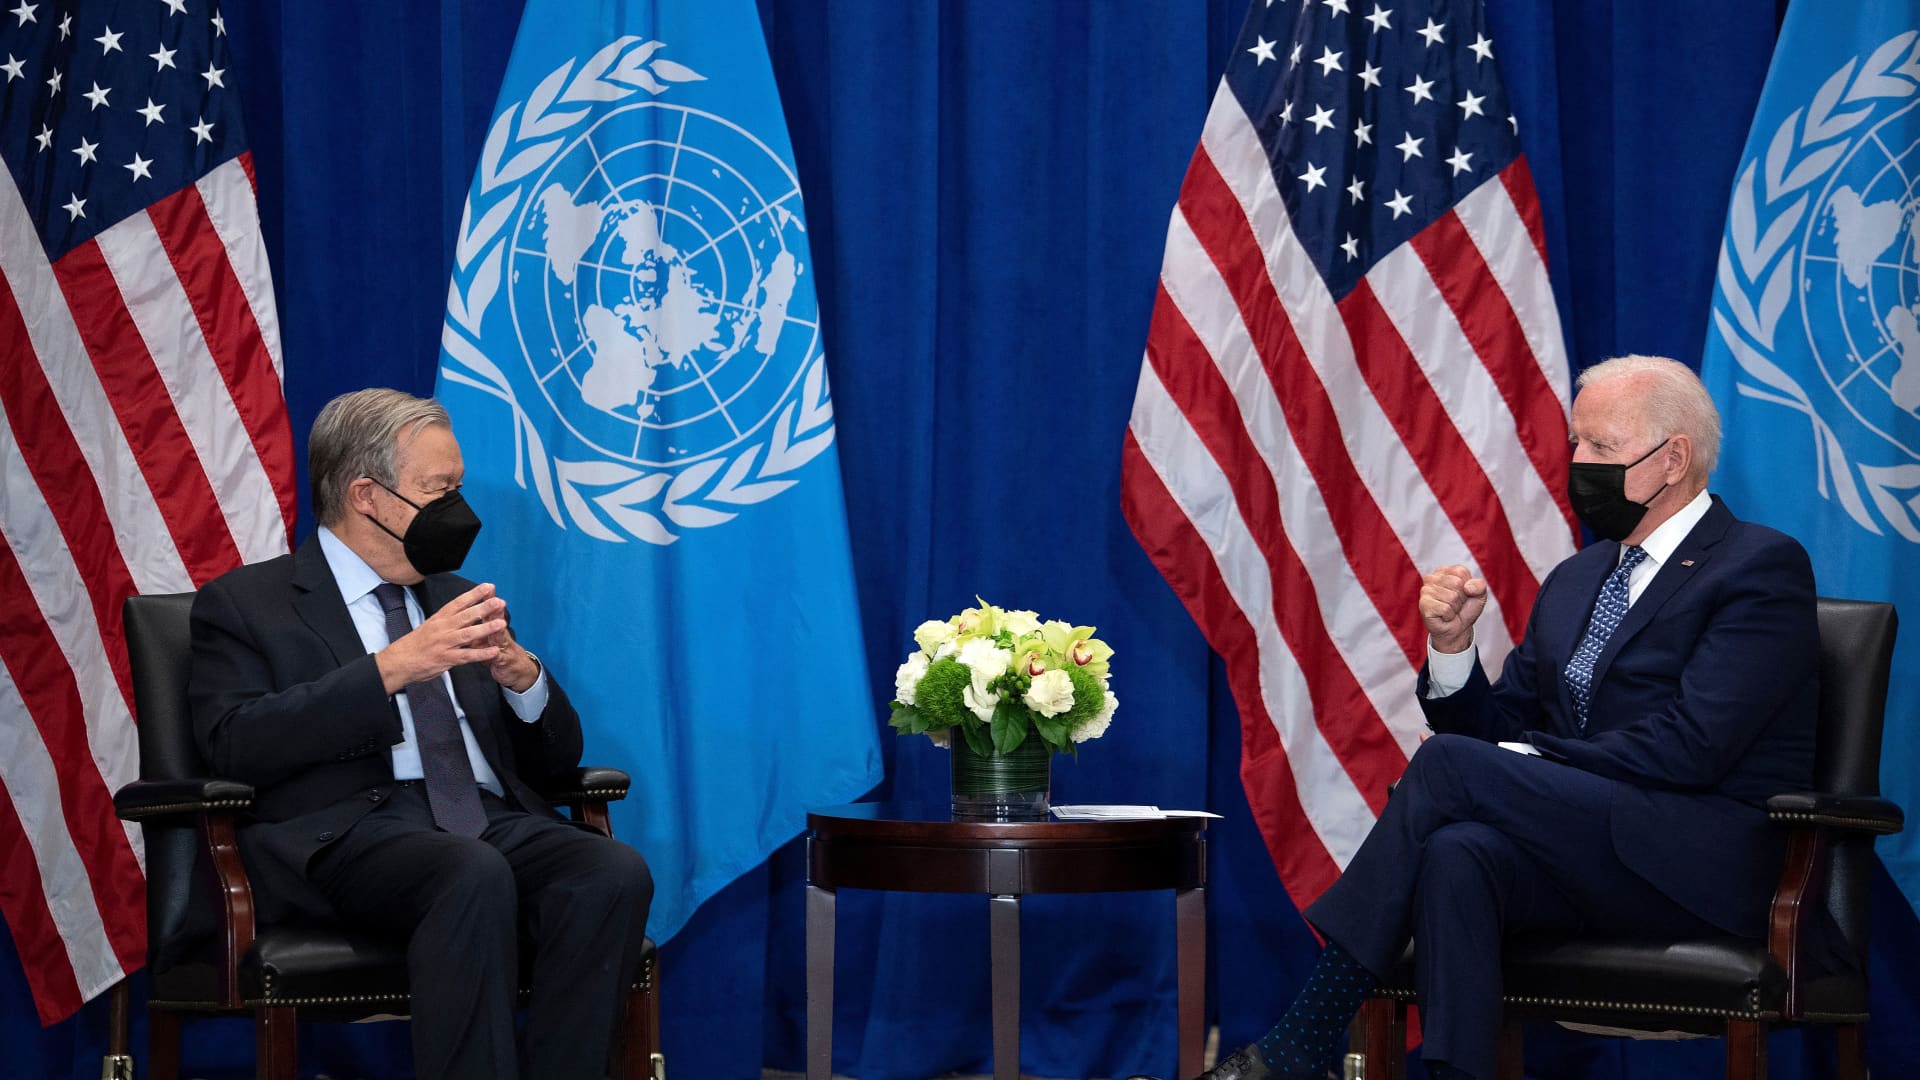 US President Joe Biden and United Nations Secretary General Antonio Guterres hold a bilateral meeting on the sidelines of the UN General Assembly 76th session General Debate at the United Nations Headquarters, in New York, September 20, 2021.